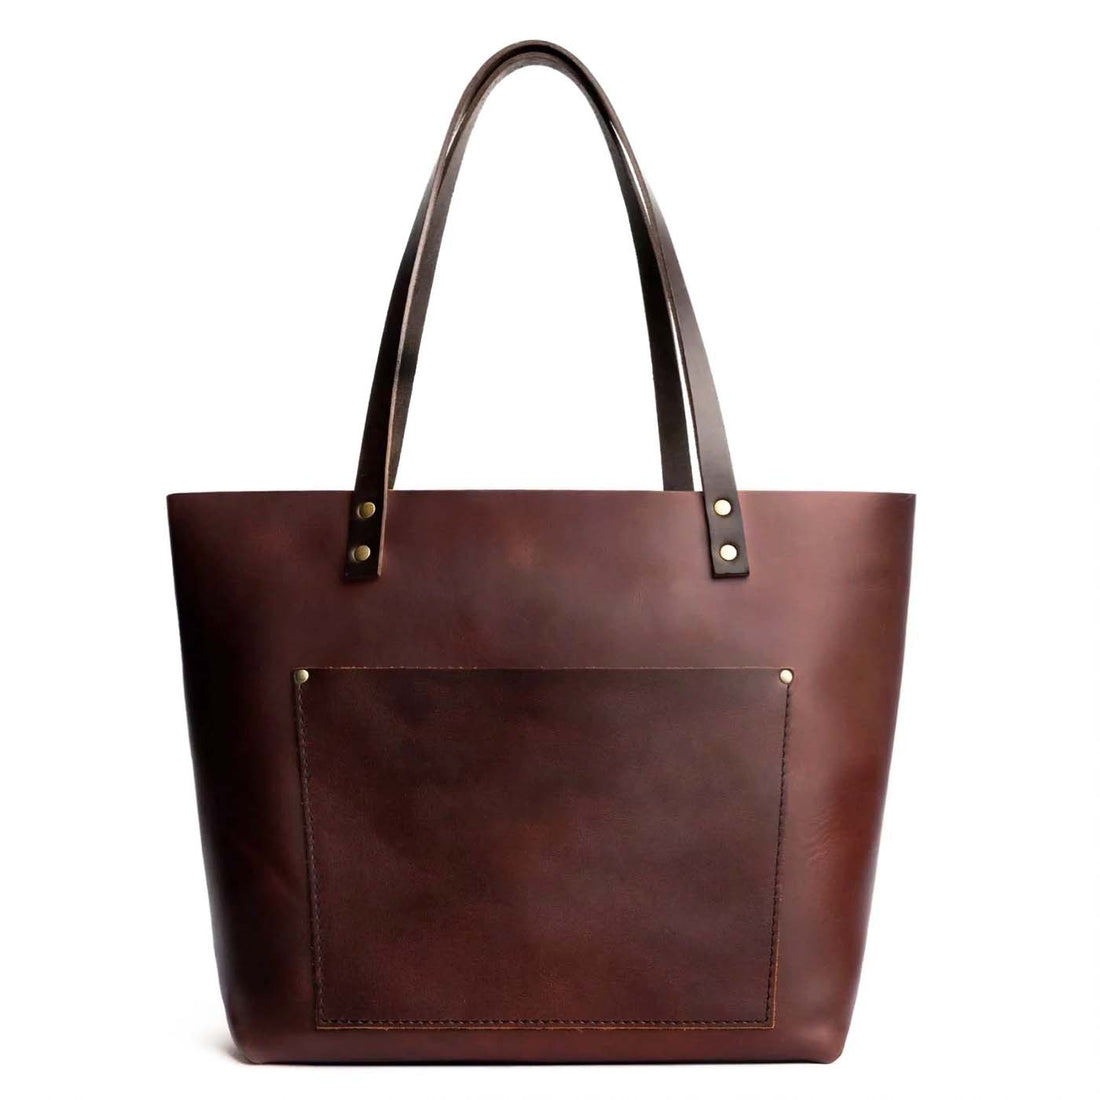 'Almost Perfect' Leather Tote Bag | Portland Leather Goods